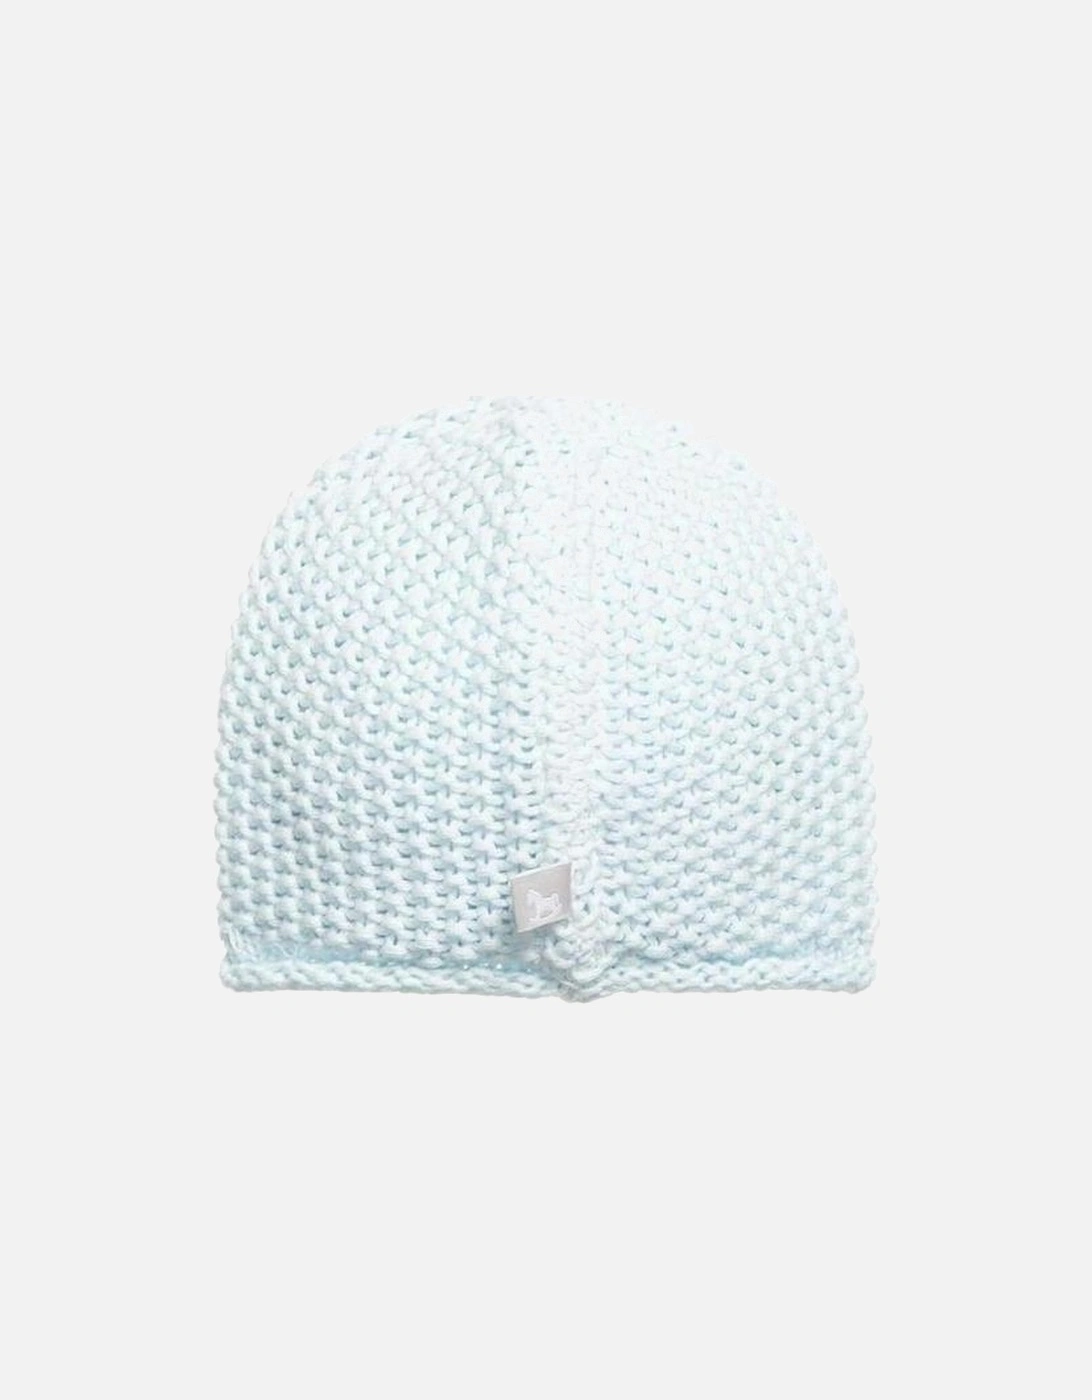 Pale Blue Knitted Hat